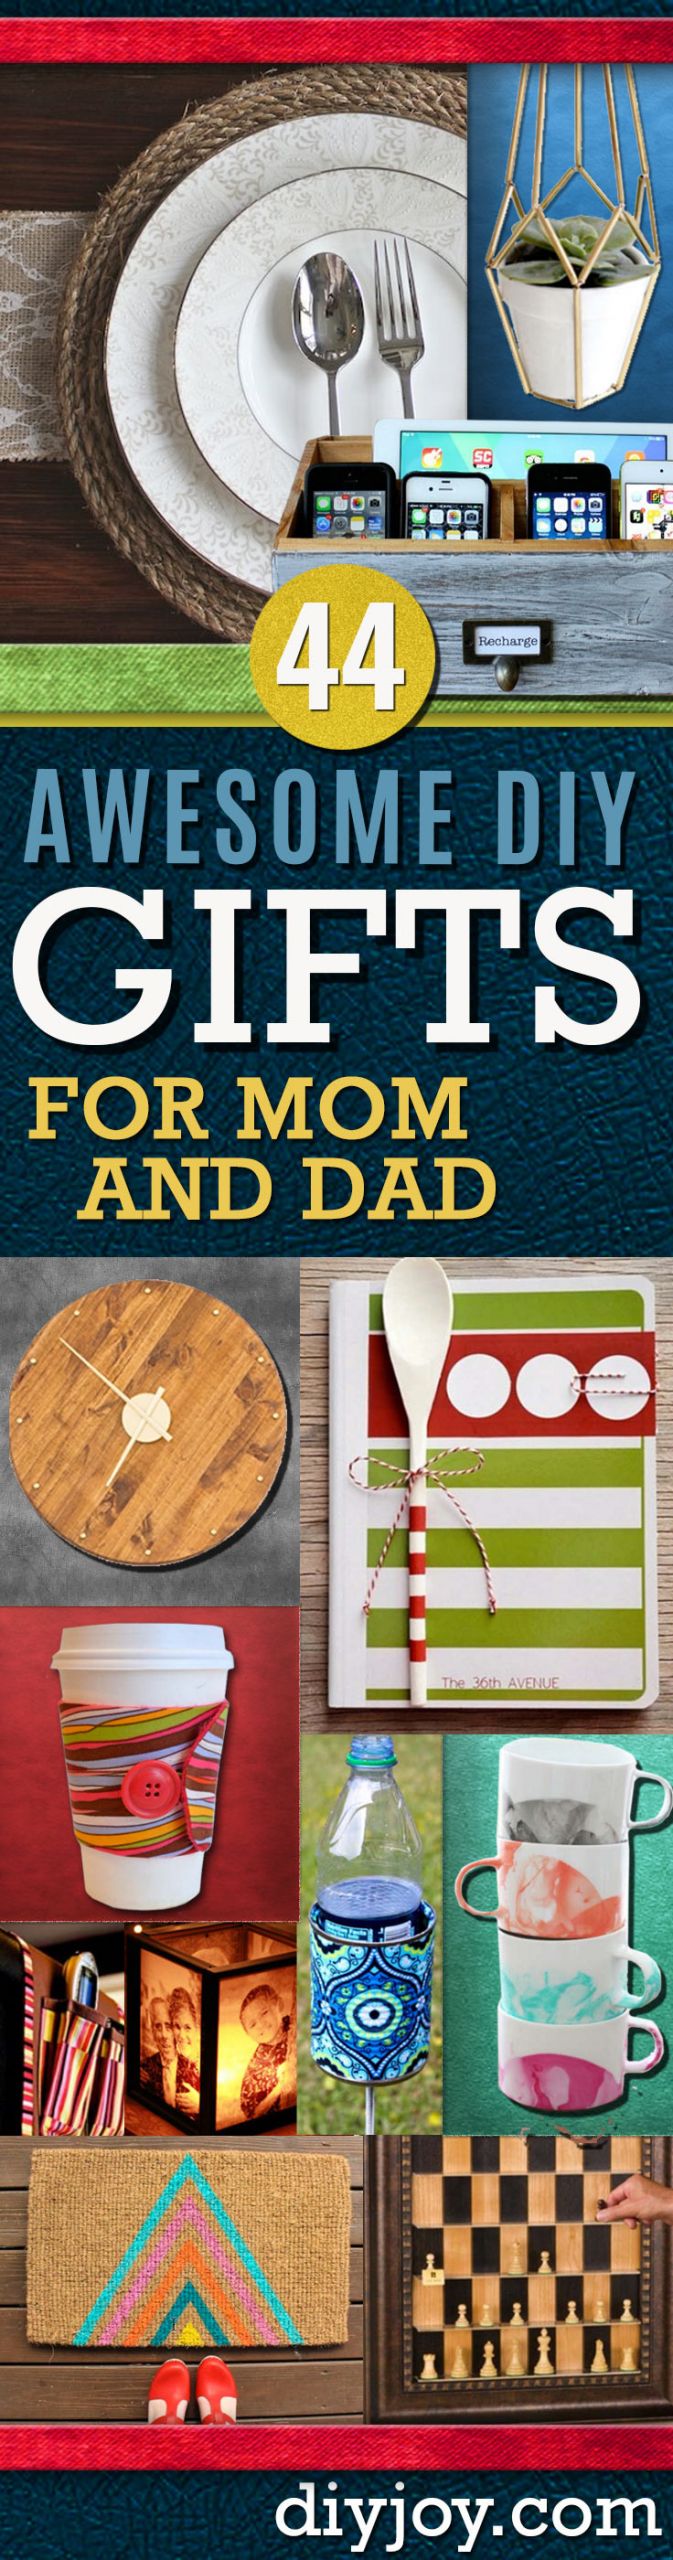 DIY Gifts For Your Mom
 Awesome DIY Gift Ideas Mom and Dad Will Love